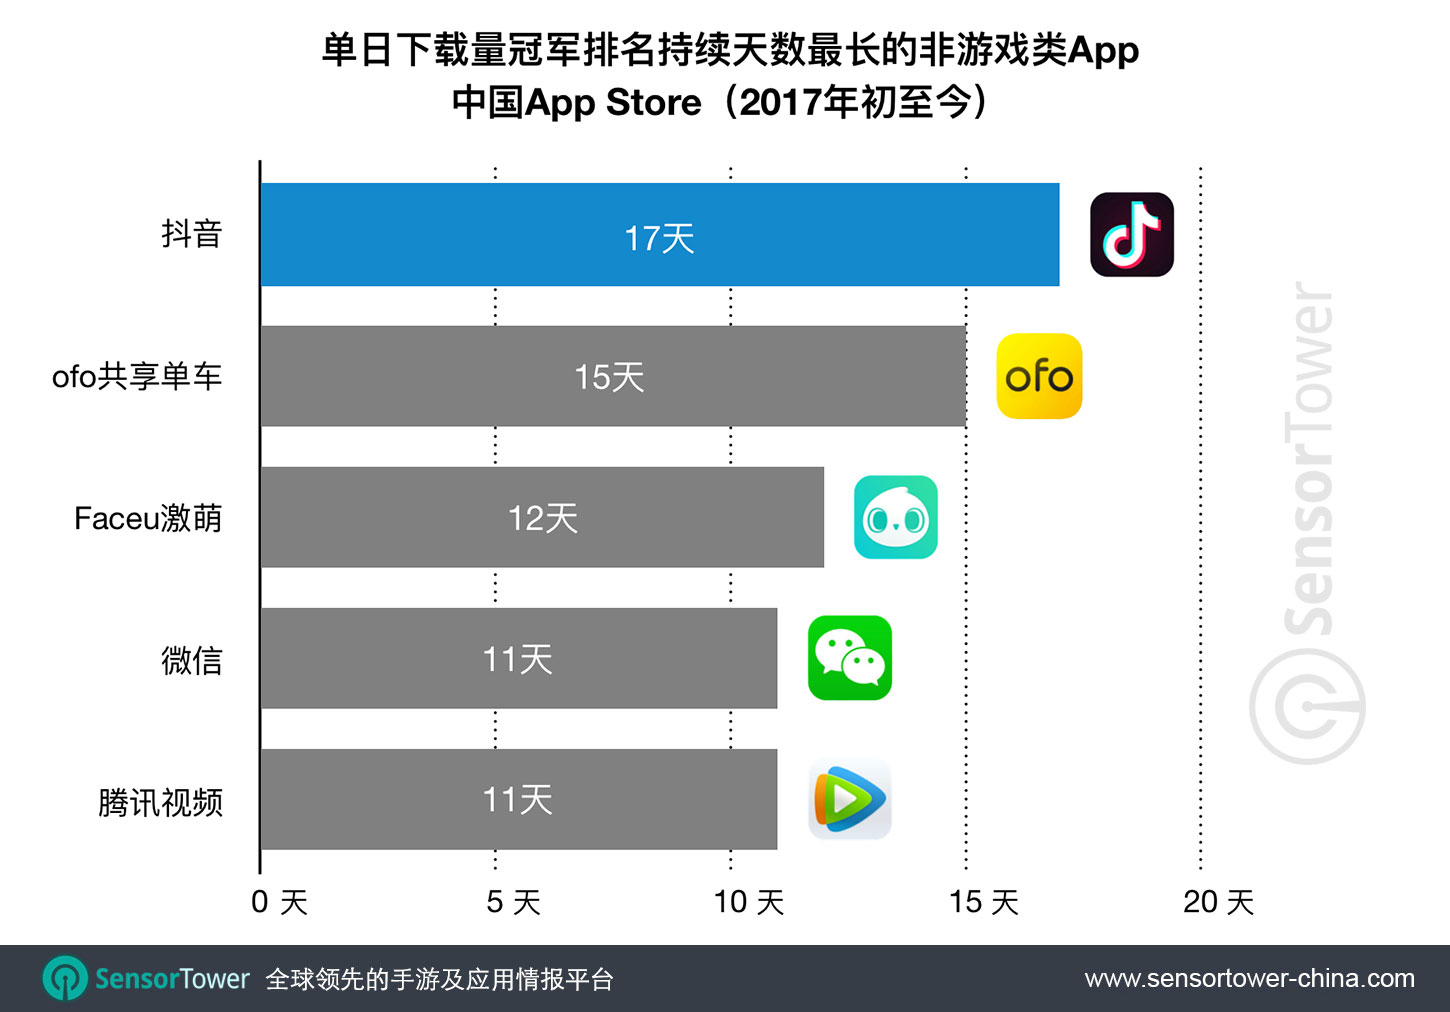 Non-Game Apps that Reached No. 1 on CN App Store for the Most Number of Days Consecutively